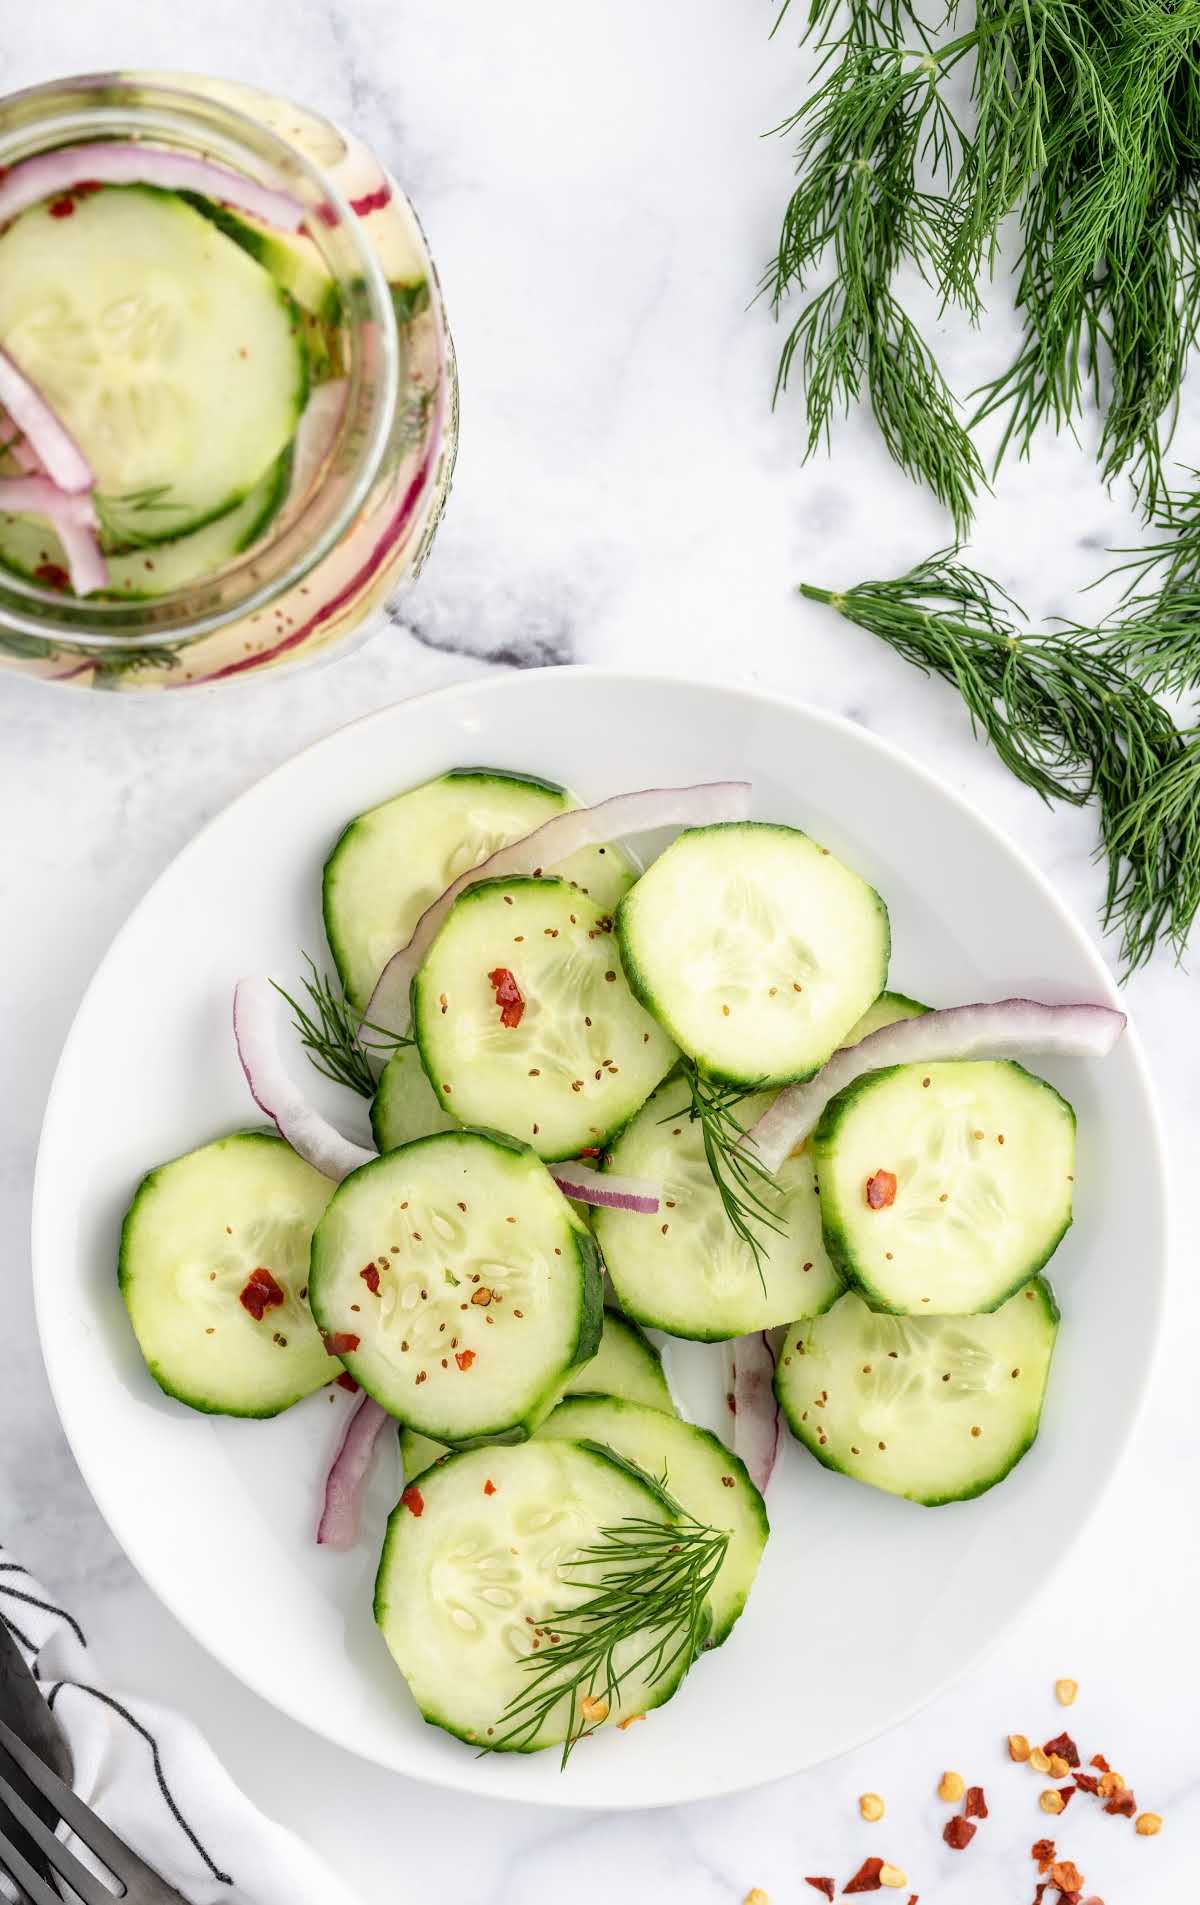 A plate of food on a table, with Cucumber and Salad